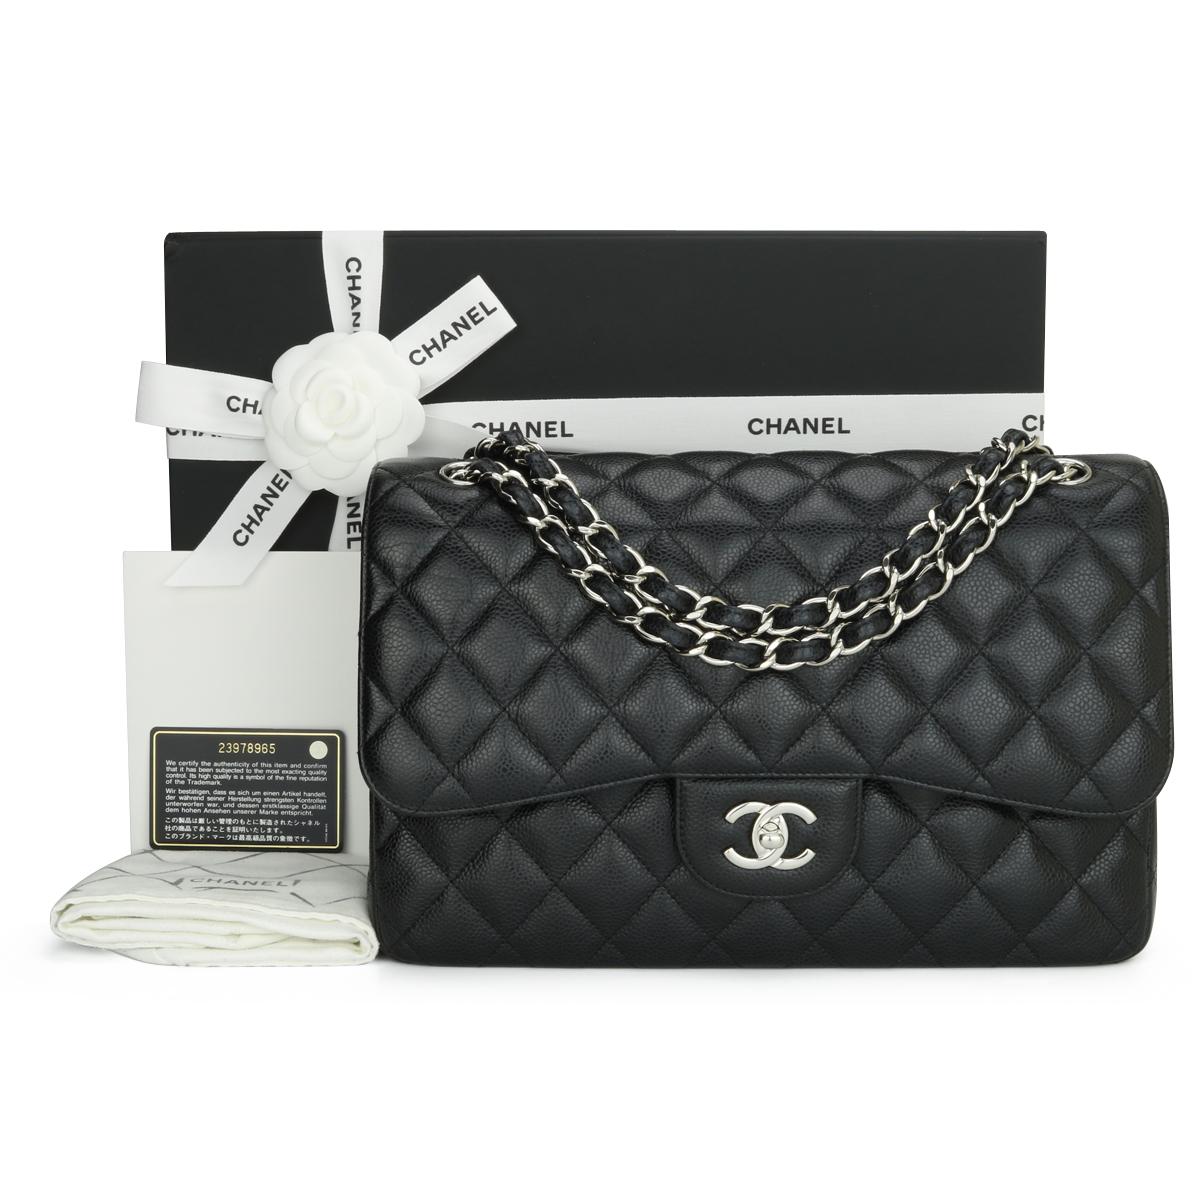 CHANEL Classic Double Flap Jumbo Bag Black Caviar with Silver Hardware 2017.

This stunning bag is in very good condition, the bag still holds its original shape, and the hardware is still very shiny. 

- Exterior Condition: Very good condition.